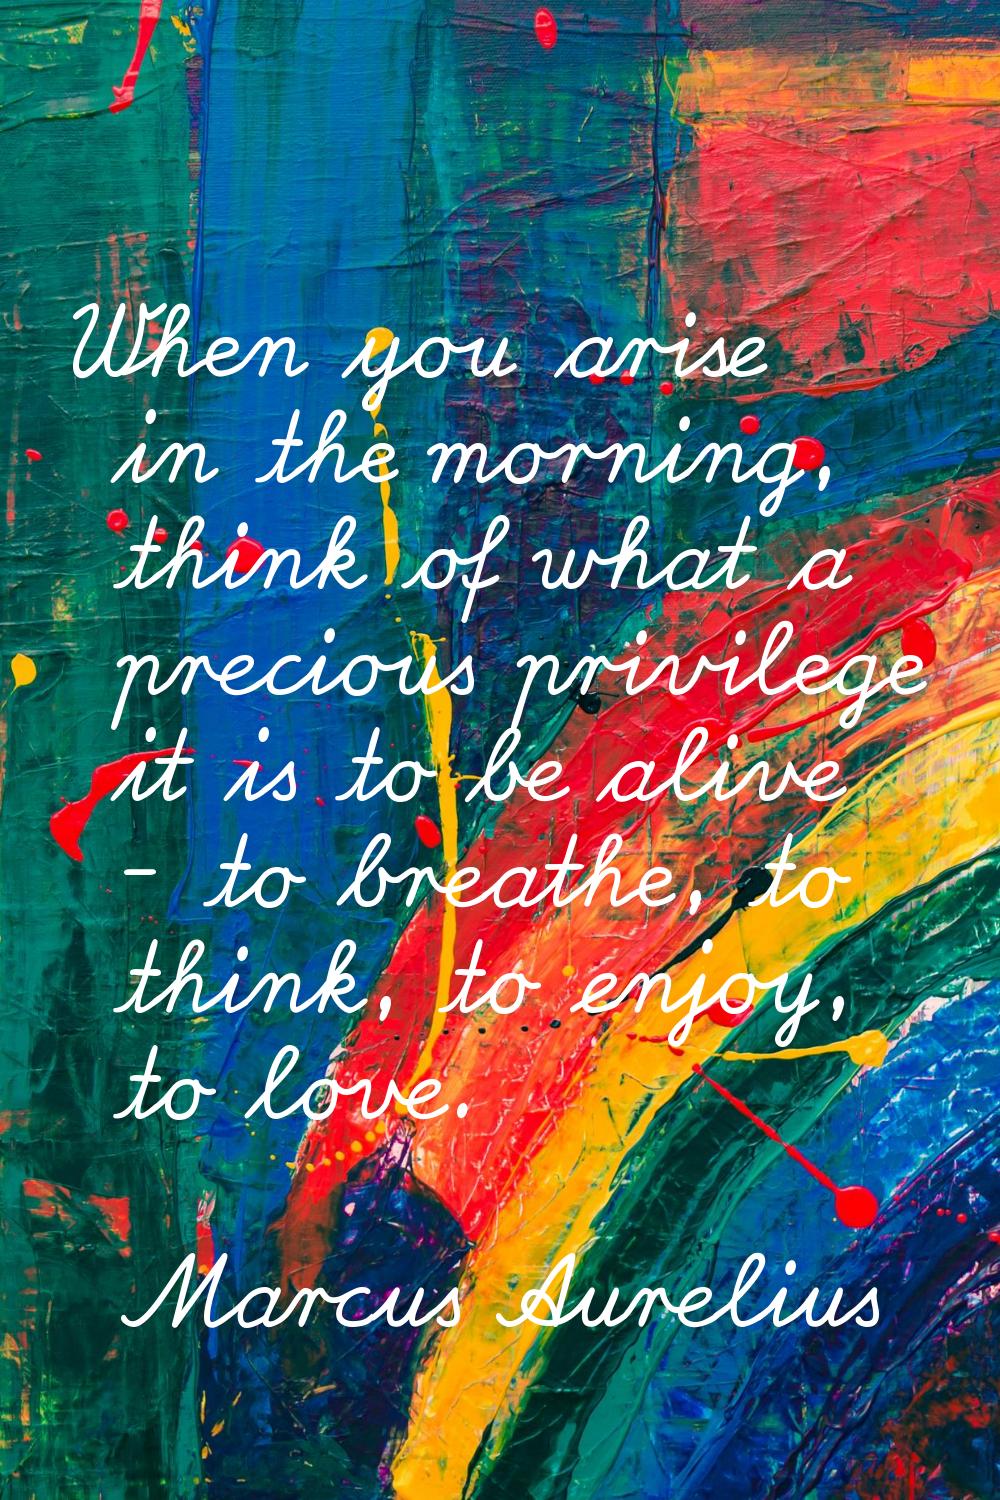 When you arise in the morning, think of what a precious privilege it is to be alive - to breathe, t